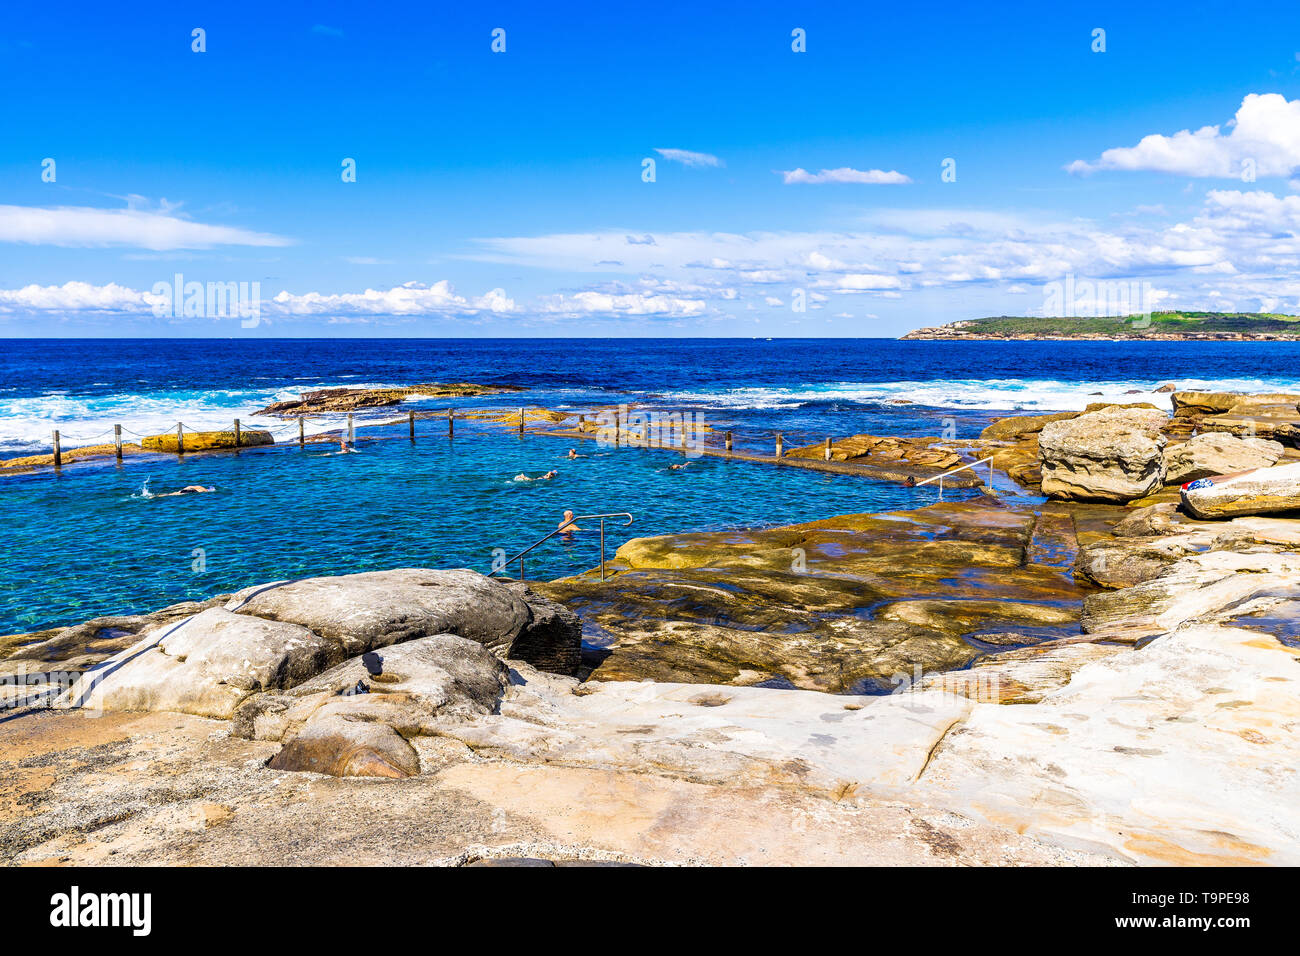 Swimmers in the rock pool, north of Maroubra Beach in Sydney, Australia Stock Photo